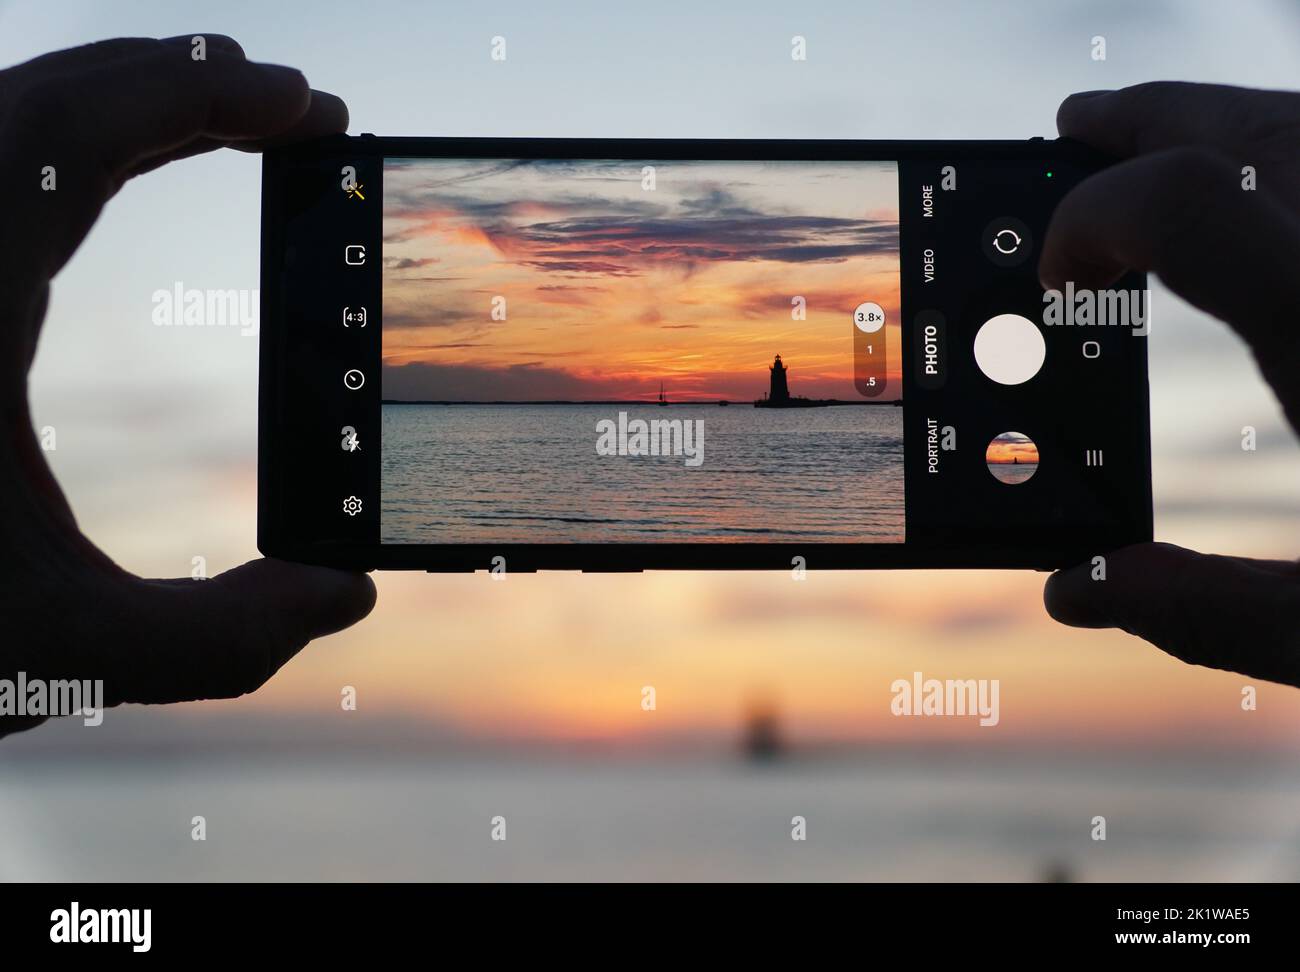 Lewes, Delaware, U.S.A - September 9, 2022 - Capturing sunset using a smartphone near Cape Henlopen State Park Stock Photo